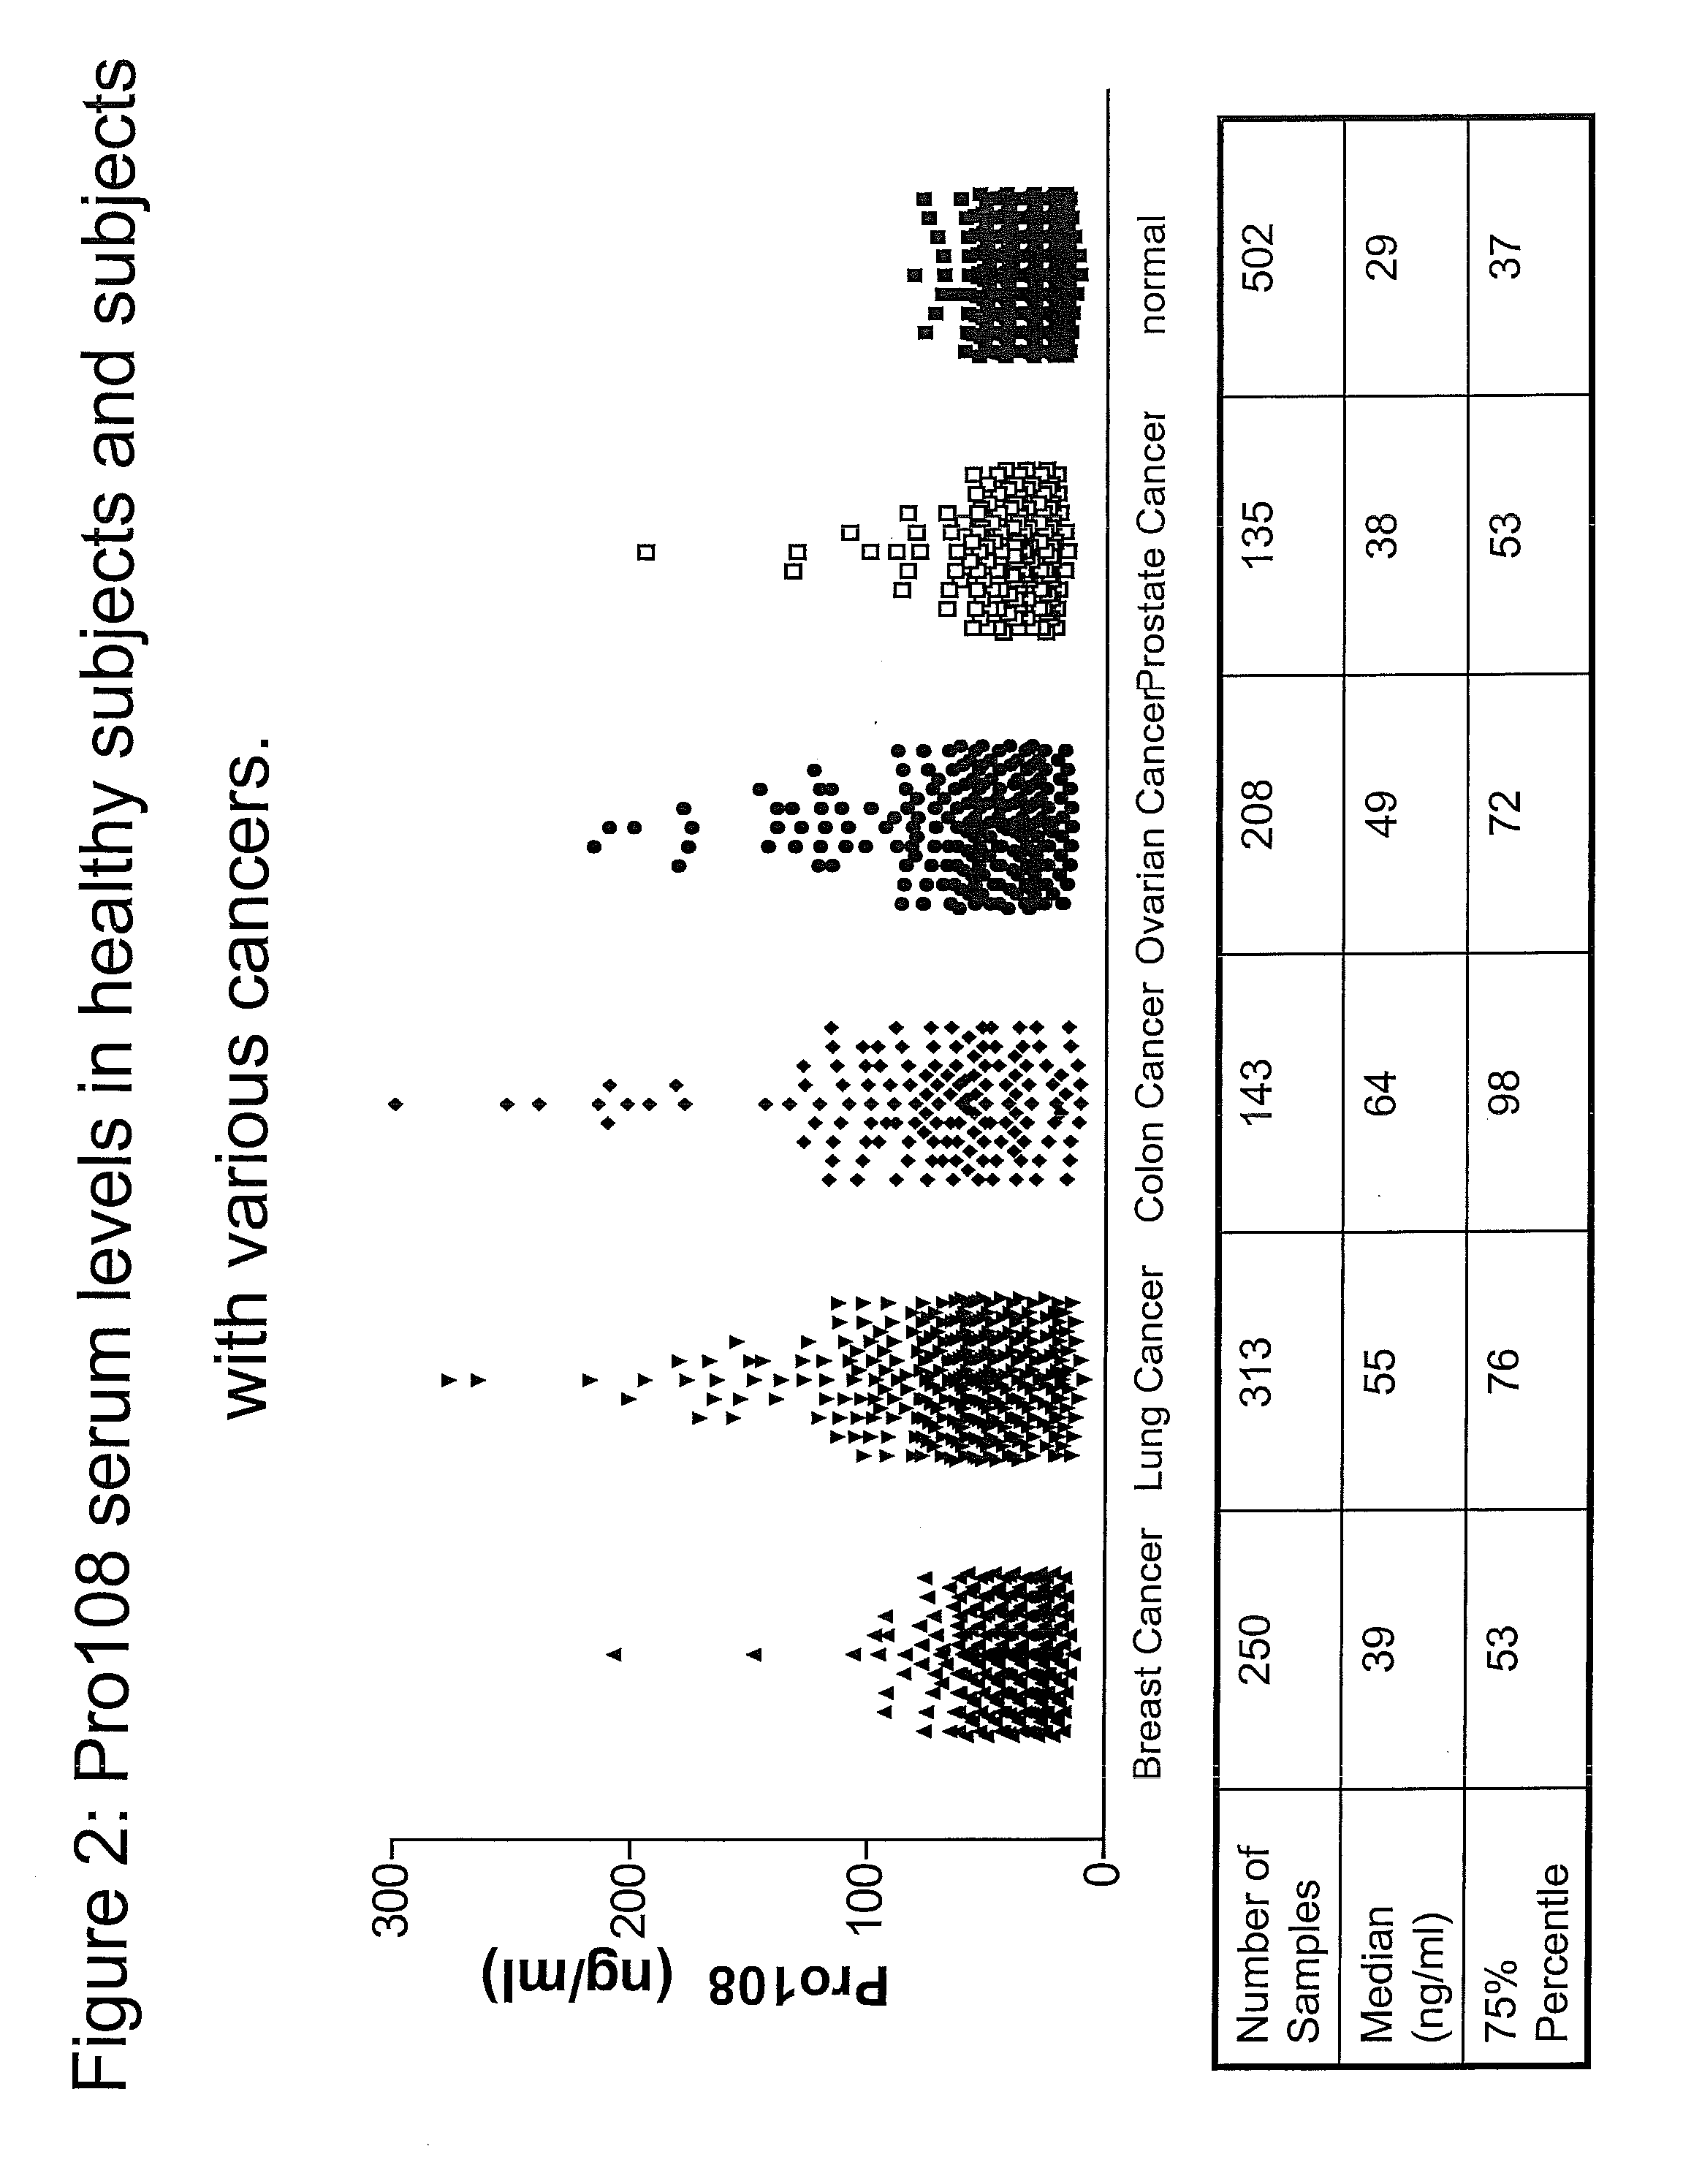 PRO108 Antibody Compositions and Methods of Use and Use of PRO108 to Assess Cancer Risk